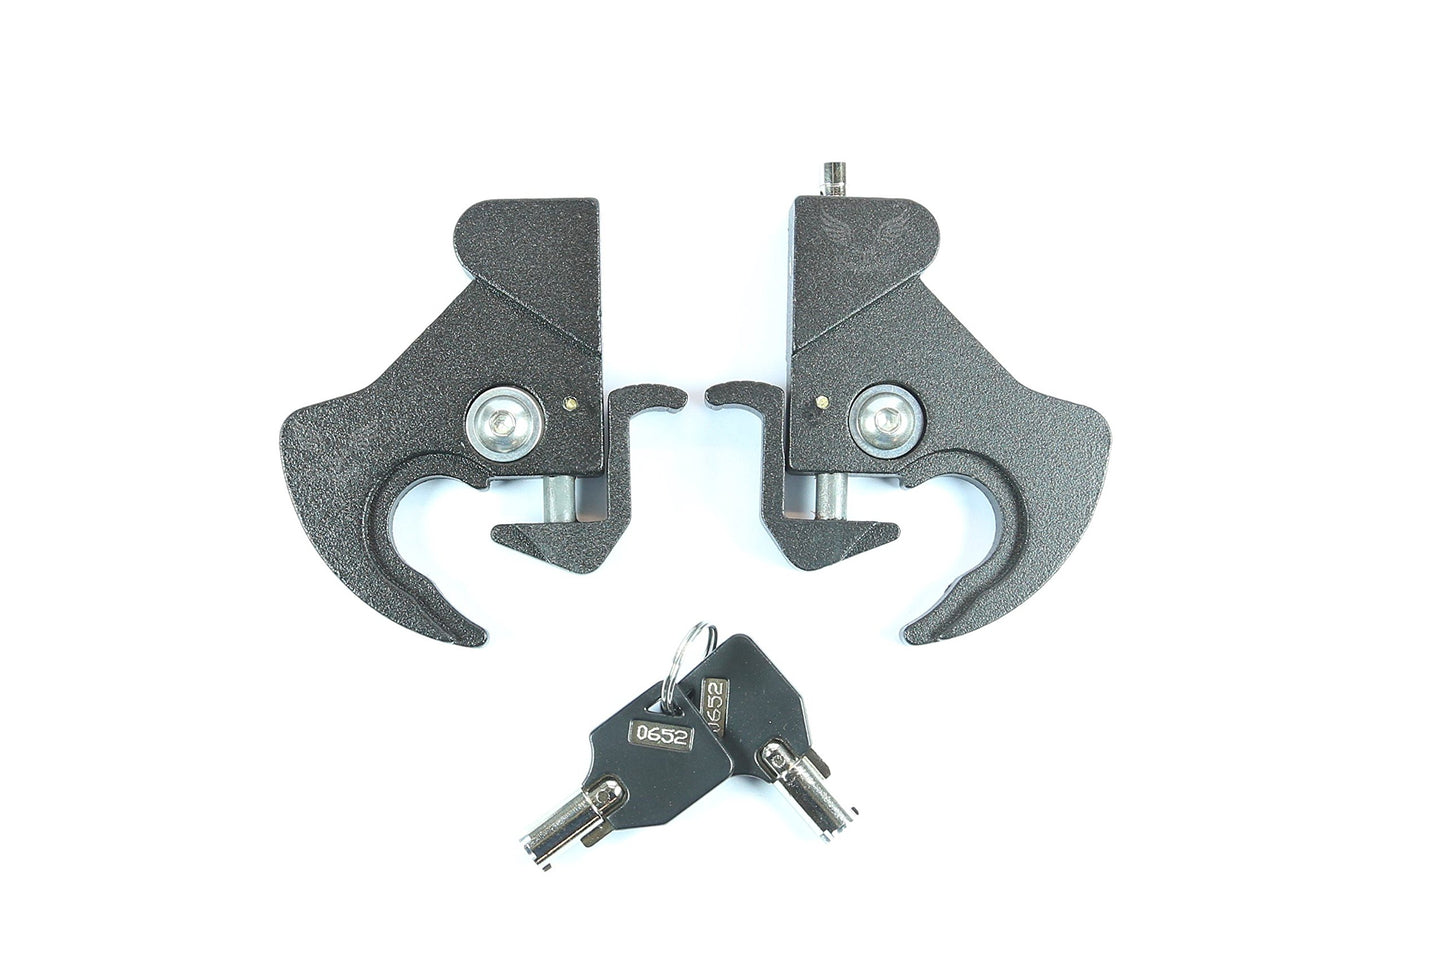 Locking Detachable Rotary Docking Latches Clips for Harley Davidson Sissy Bar or Luggage Rack (Lock with Keys)